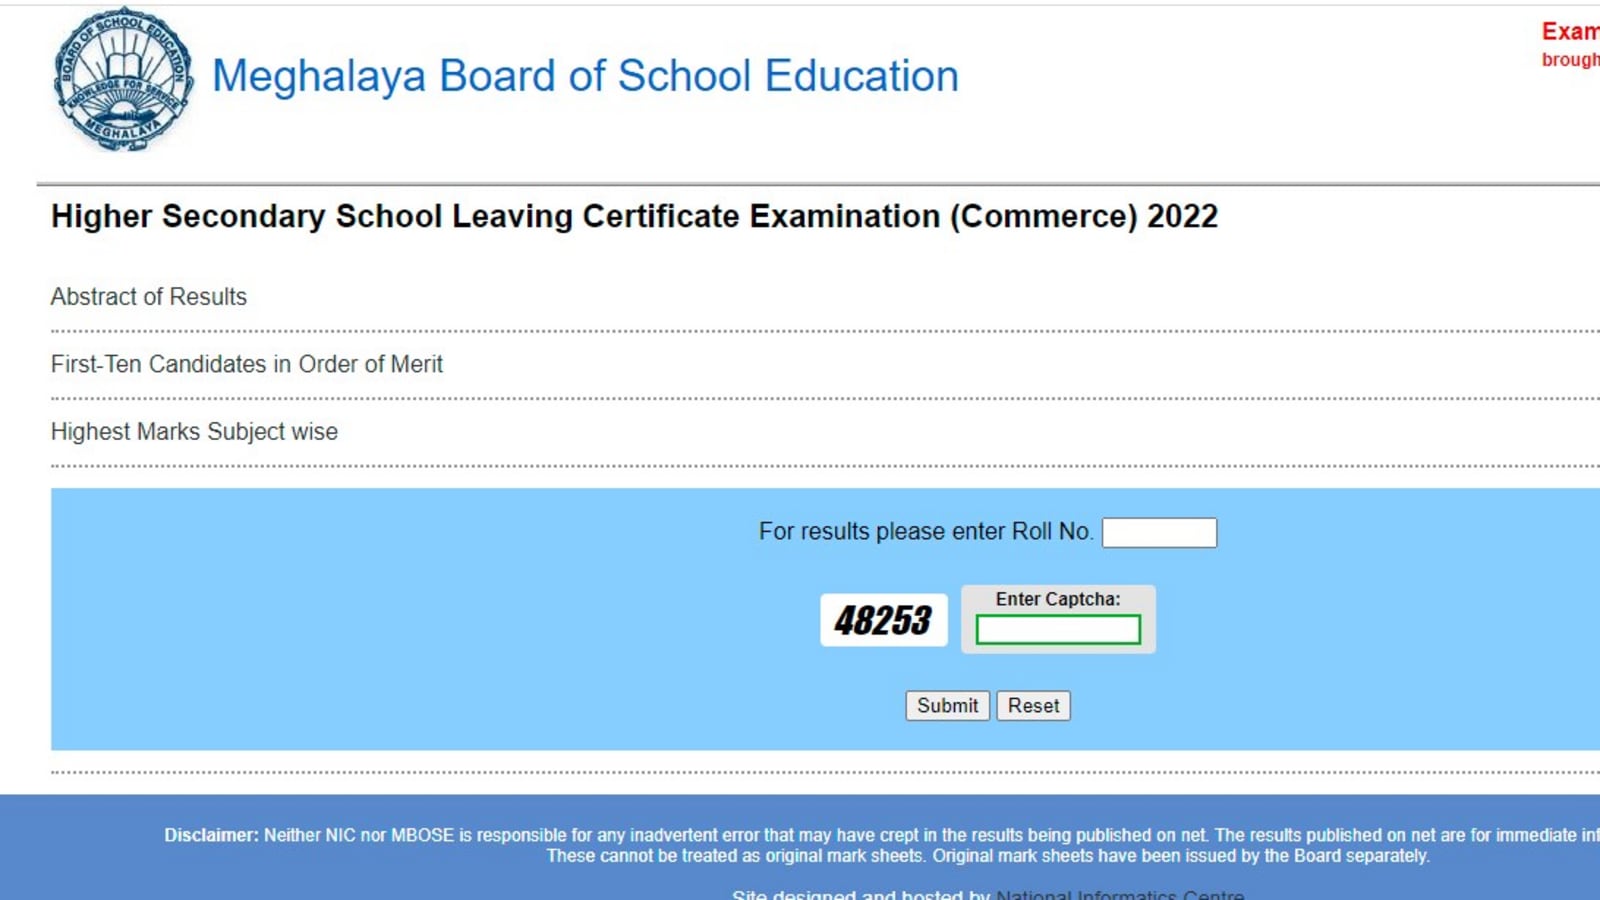 MBOSE HSSLC Result 2022 out, direct link for Meghalaya Science, Commerce results